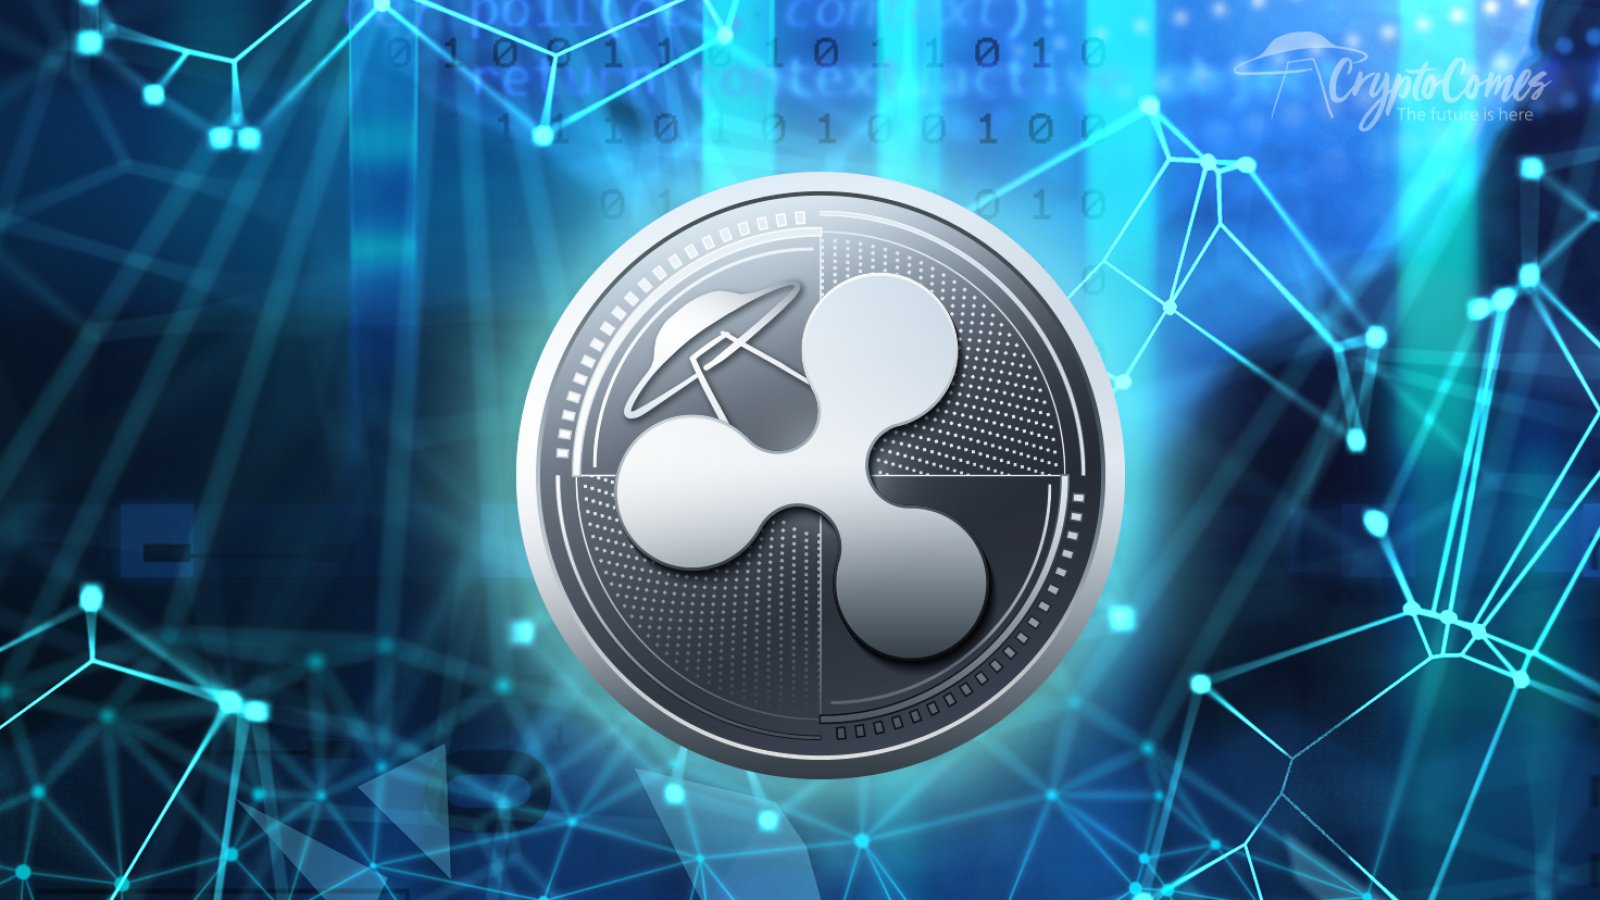 What is Ripple (XRP) - Simple Explanation for Beginners